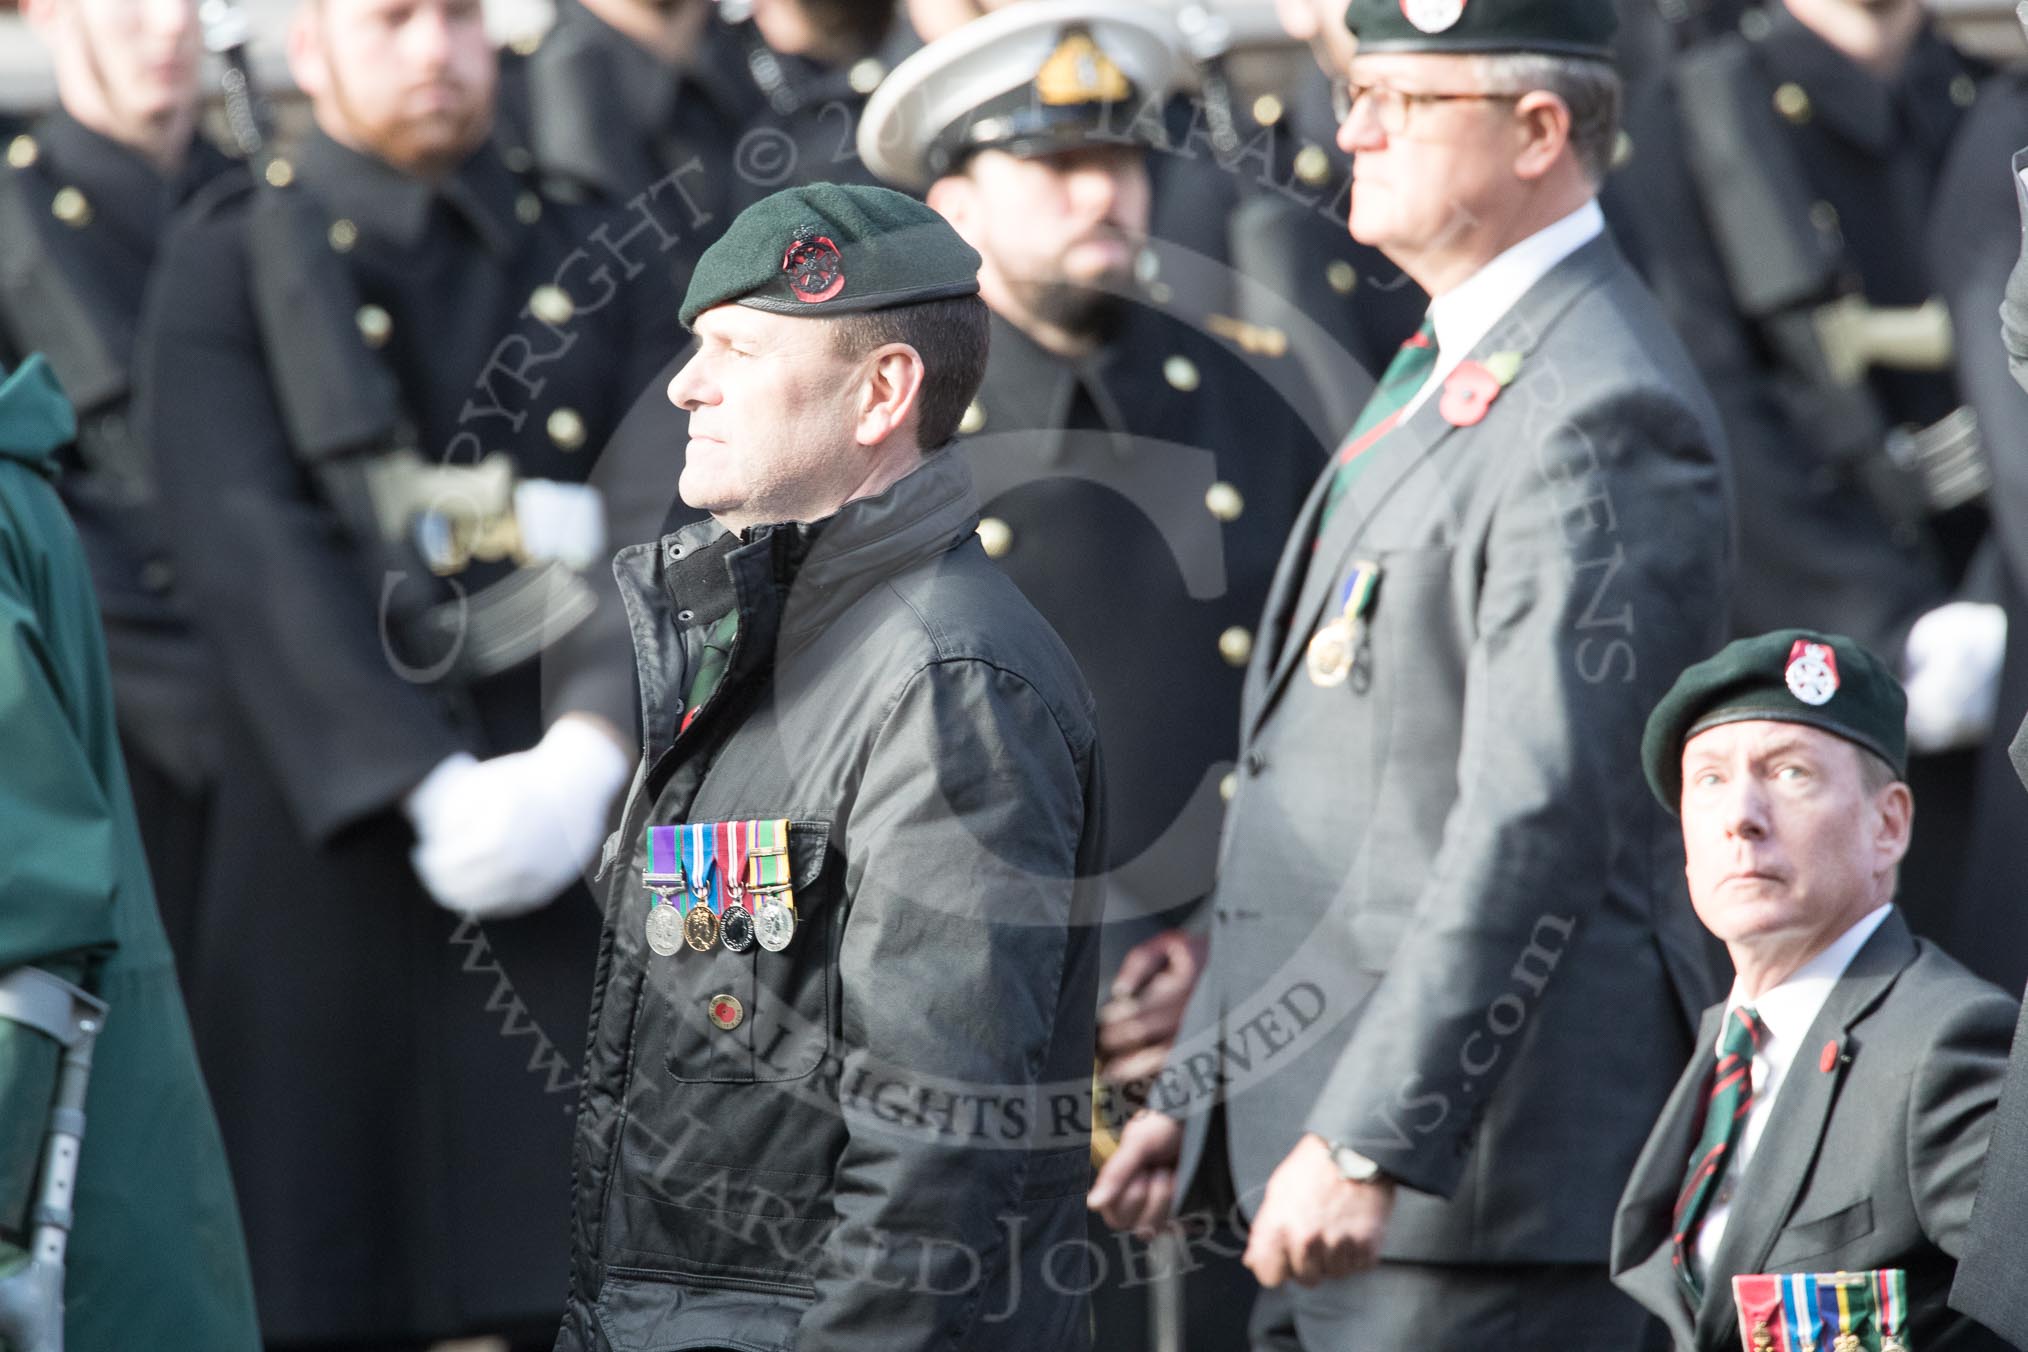 Royal Green Jackets (Group A2, 153 members) during the Royal British Legion March Past on Remembrance Sunday at the Cenotaph, Whitehall, Westminster, London, 11 November 2018, 11:55. On the right: BBC security correspondent Frank Gardner, who served with the Royal Green Jackets from 1984 to 2006.